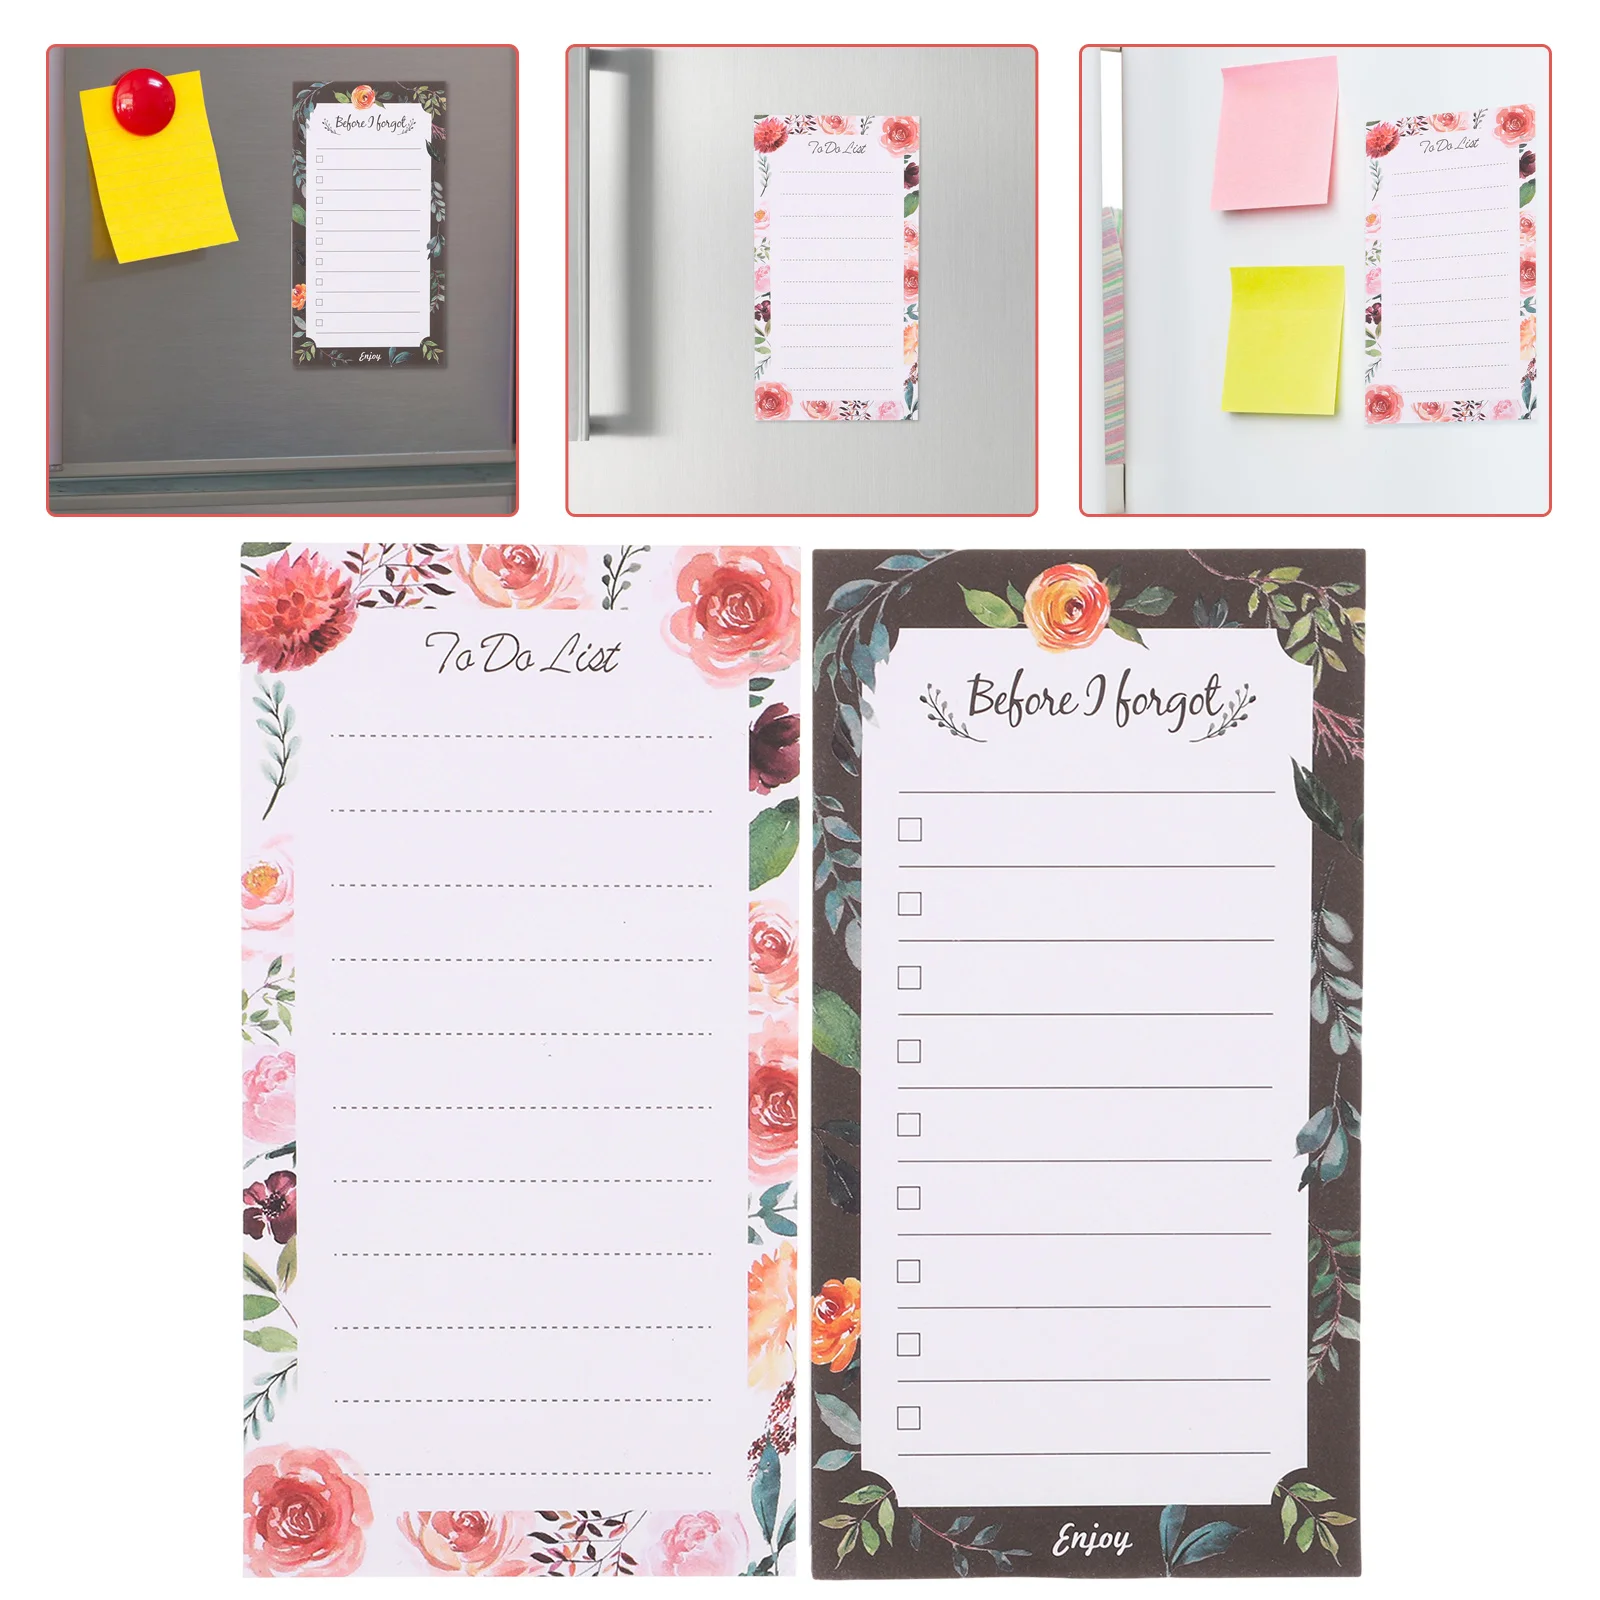 2 Pcs Fridge Magnetic Notepad Pads Grocery List Sticky Shopping Notepads to Do with